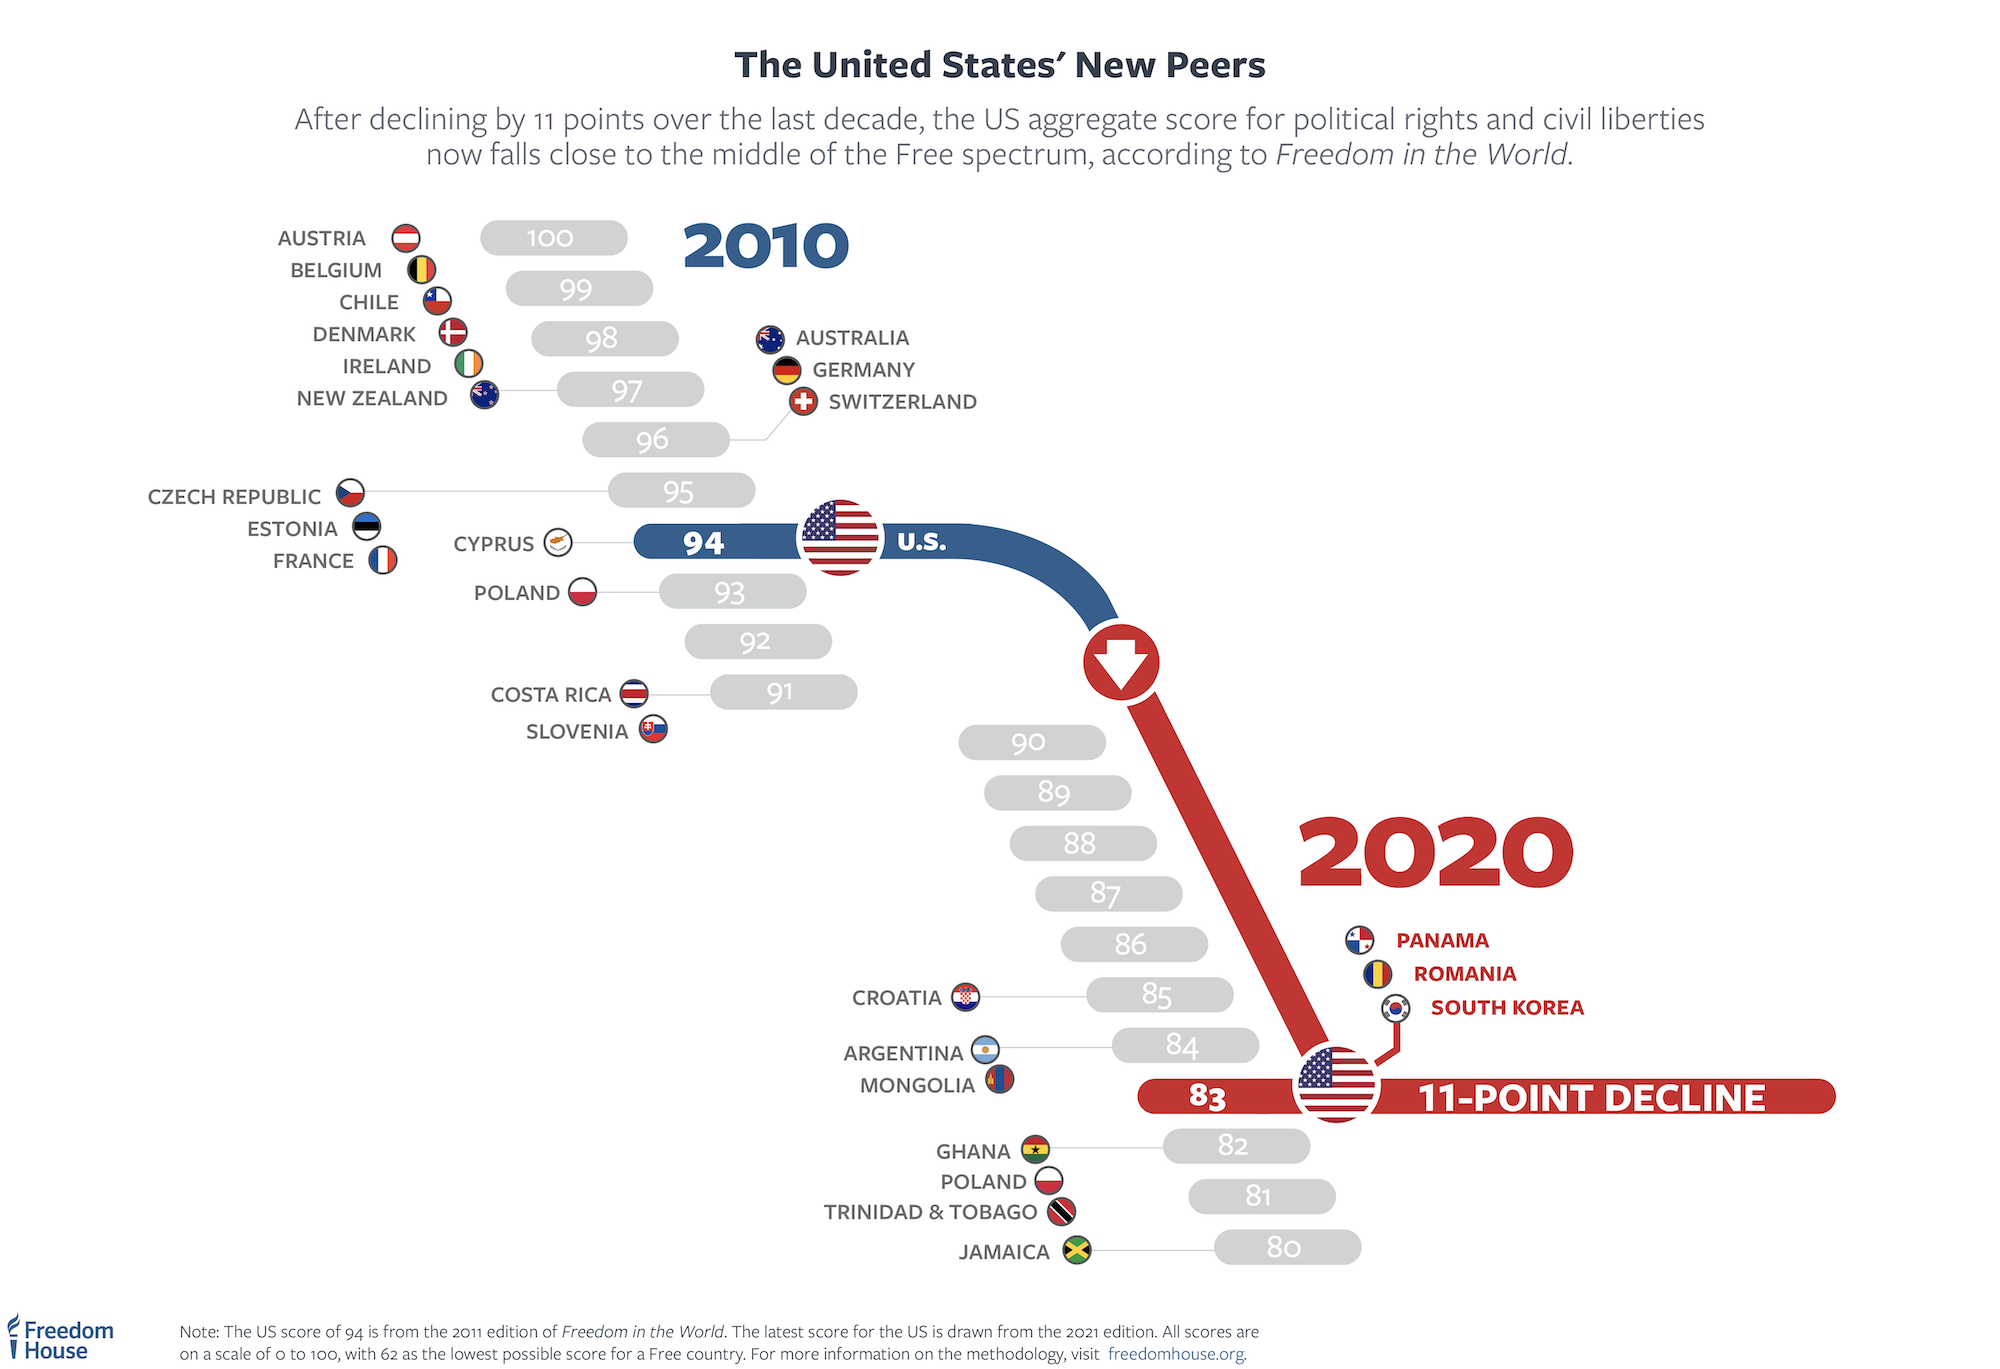 Between 2010 and 2020, the U.S. fell eleven points in Freedom House’s annual report on political rights and civil liberties, Freedom in the World. Considered from a global perspective, the erosion of US democracy is remarkable, especially for a country that has long aspired to serve as a beacon of freedom for the world. A decade ago, the United States received a score of 94 out of 100, which put it in the company of other established democracies, like France and Germany. Today, whereas those former peers remain at 90 or above, the U.S. has fallen to a score of 83, leaving it in a cohort with newer democracies like Romania, Croatia, and Panama. Graphic: Freedom House